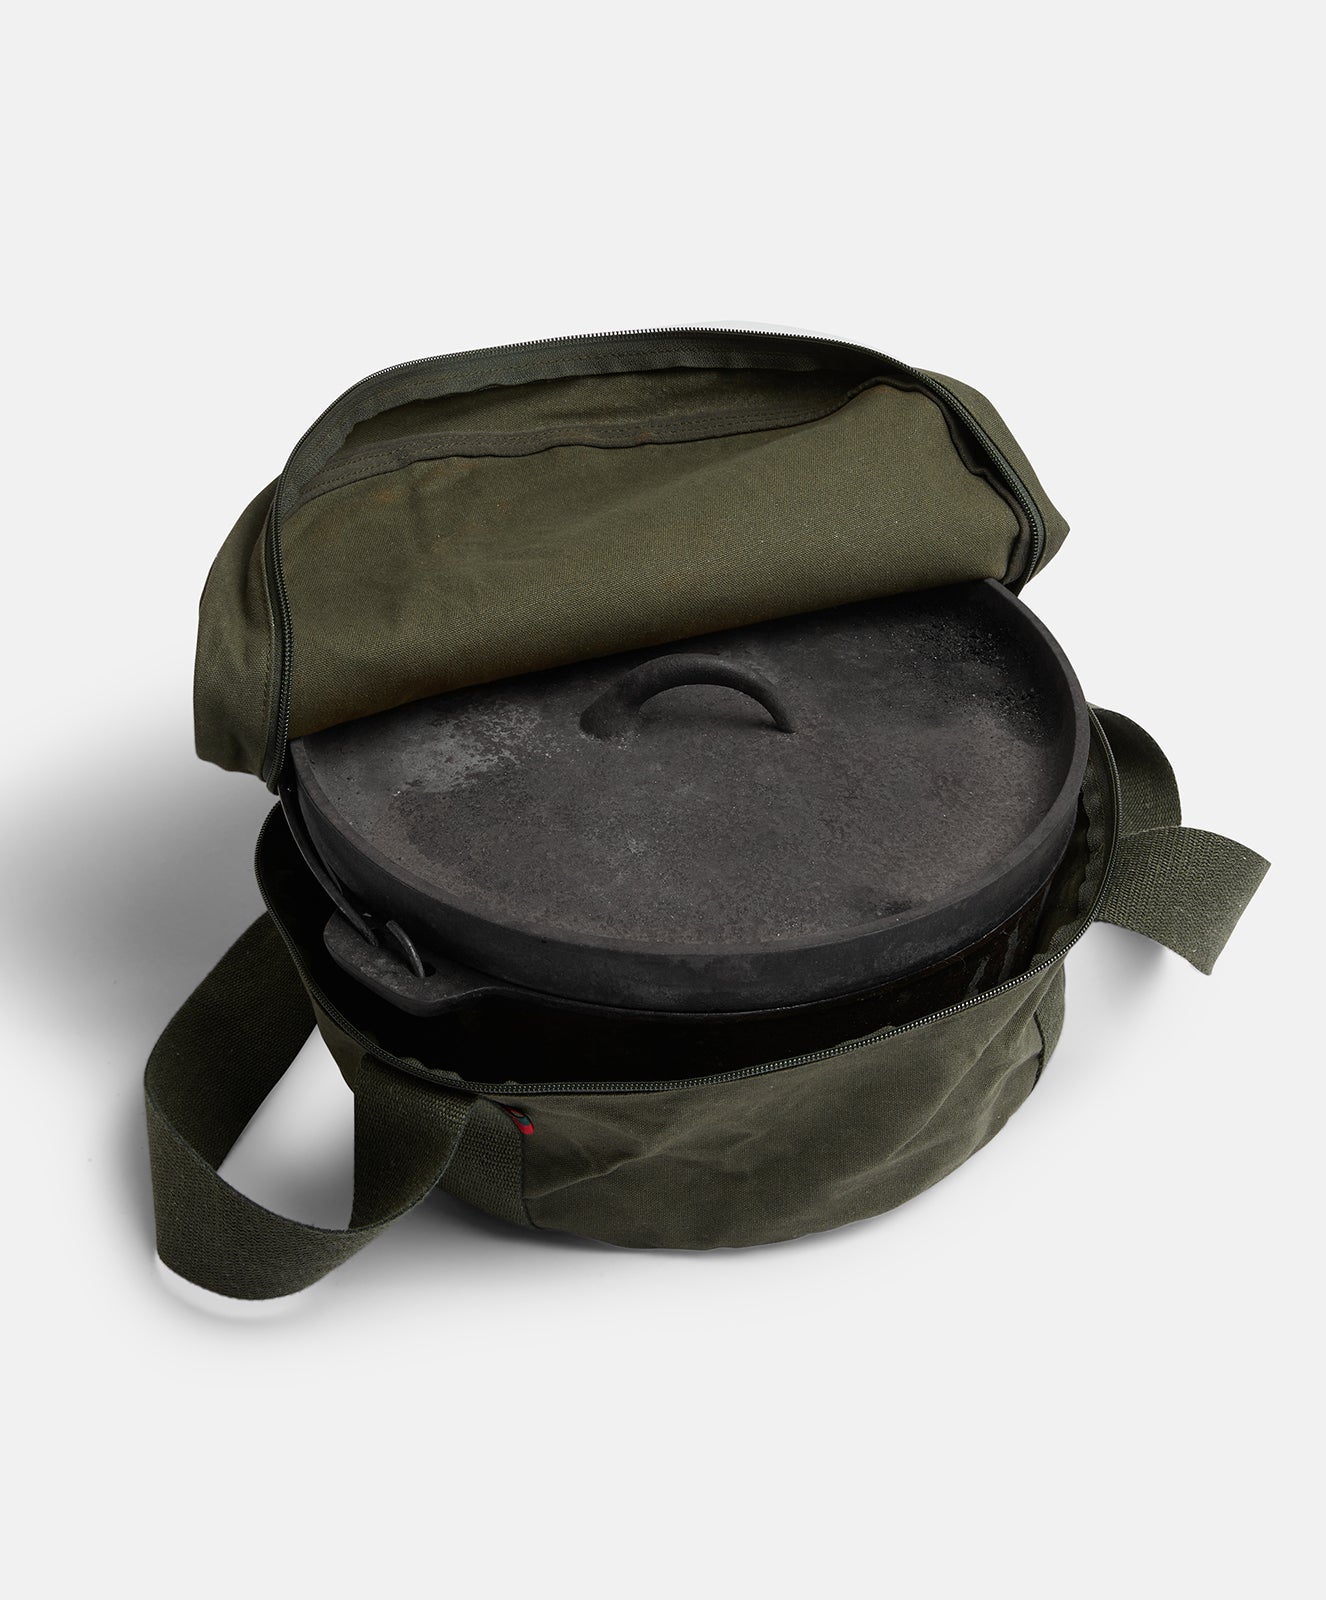 Camp Cook Camp Oven Bag | Duffle Green